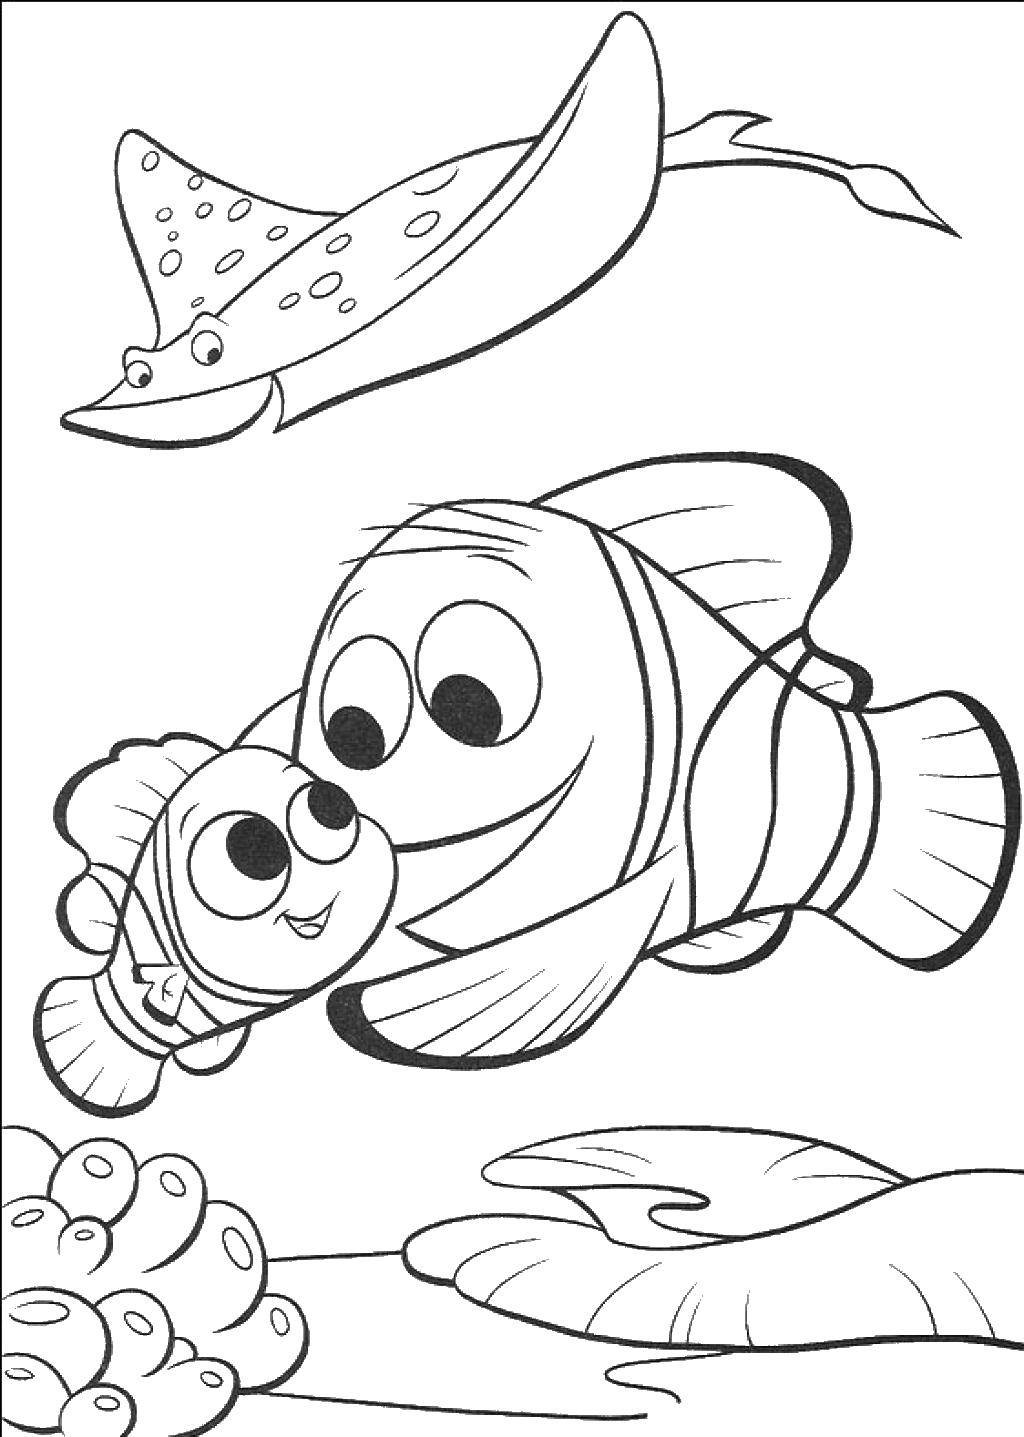 Coloring Nemo and friend. Category Sea animals. Tags:  Underwater world, fish.